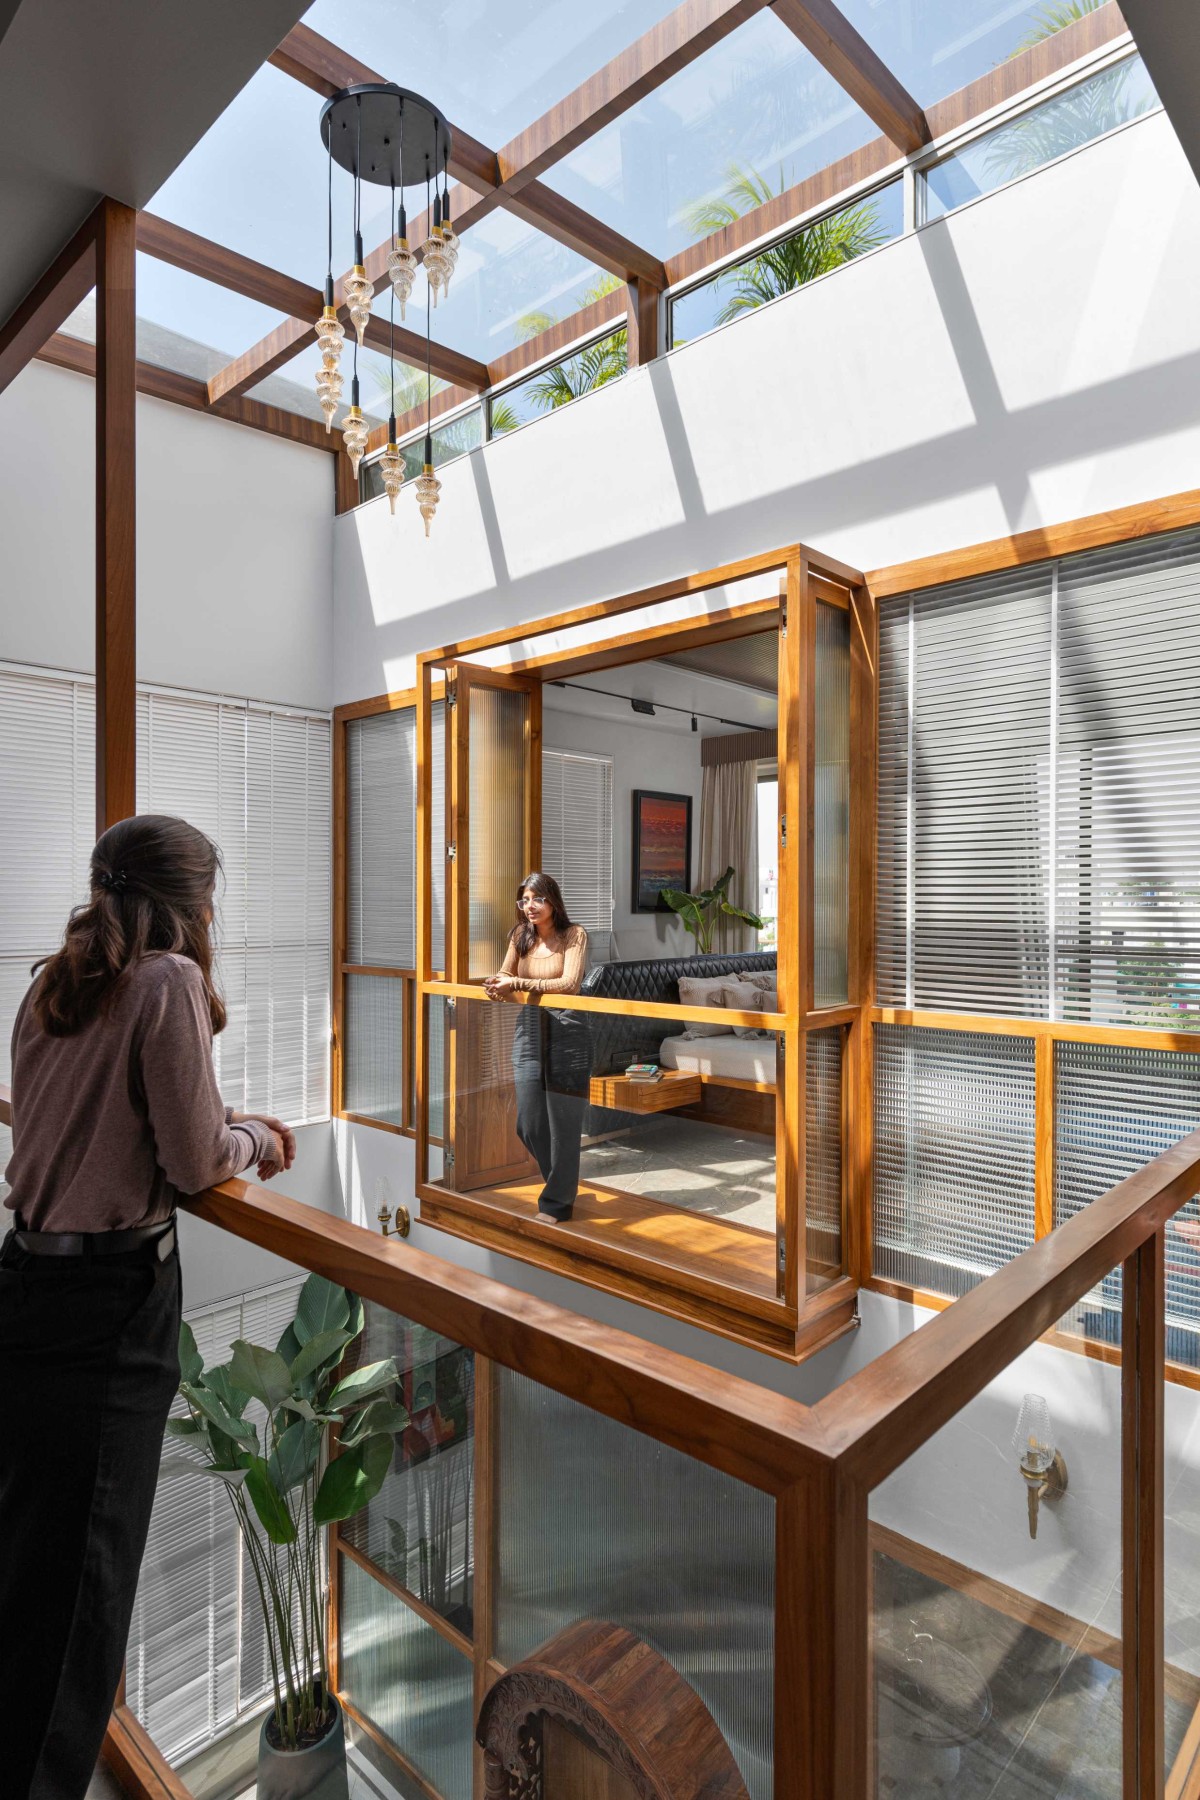 Visual Connection Through Internal Courtyard of The House With No Walls by The Design Alley